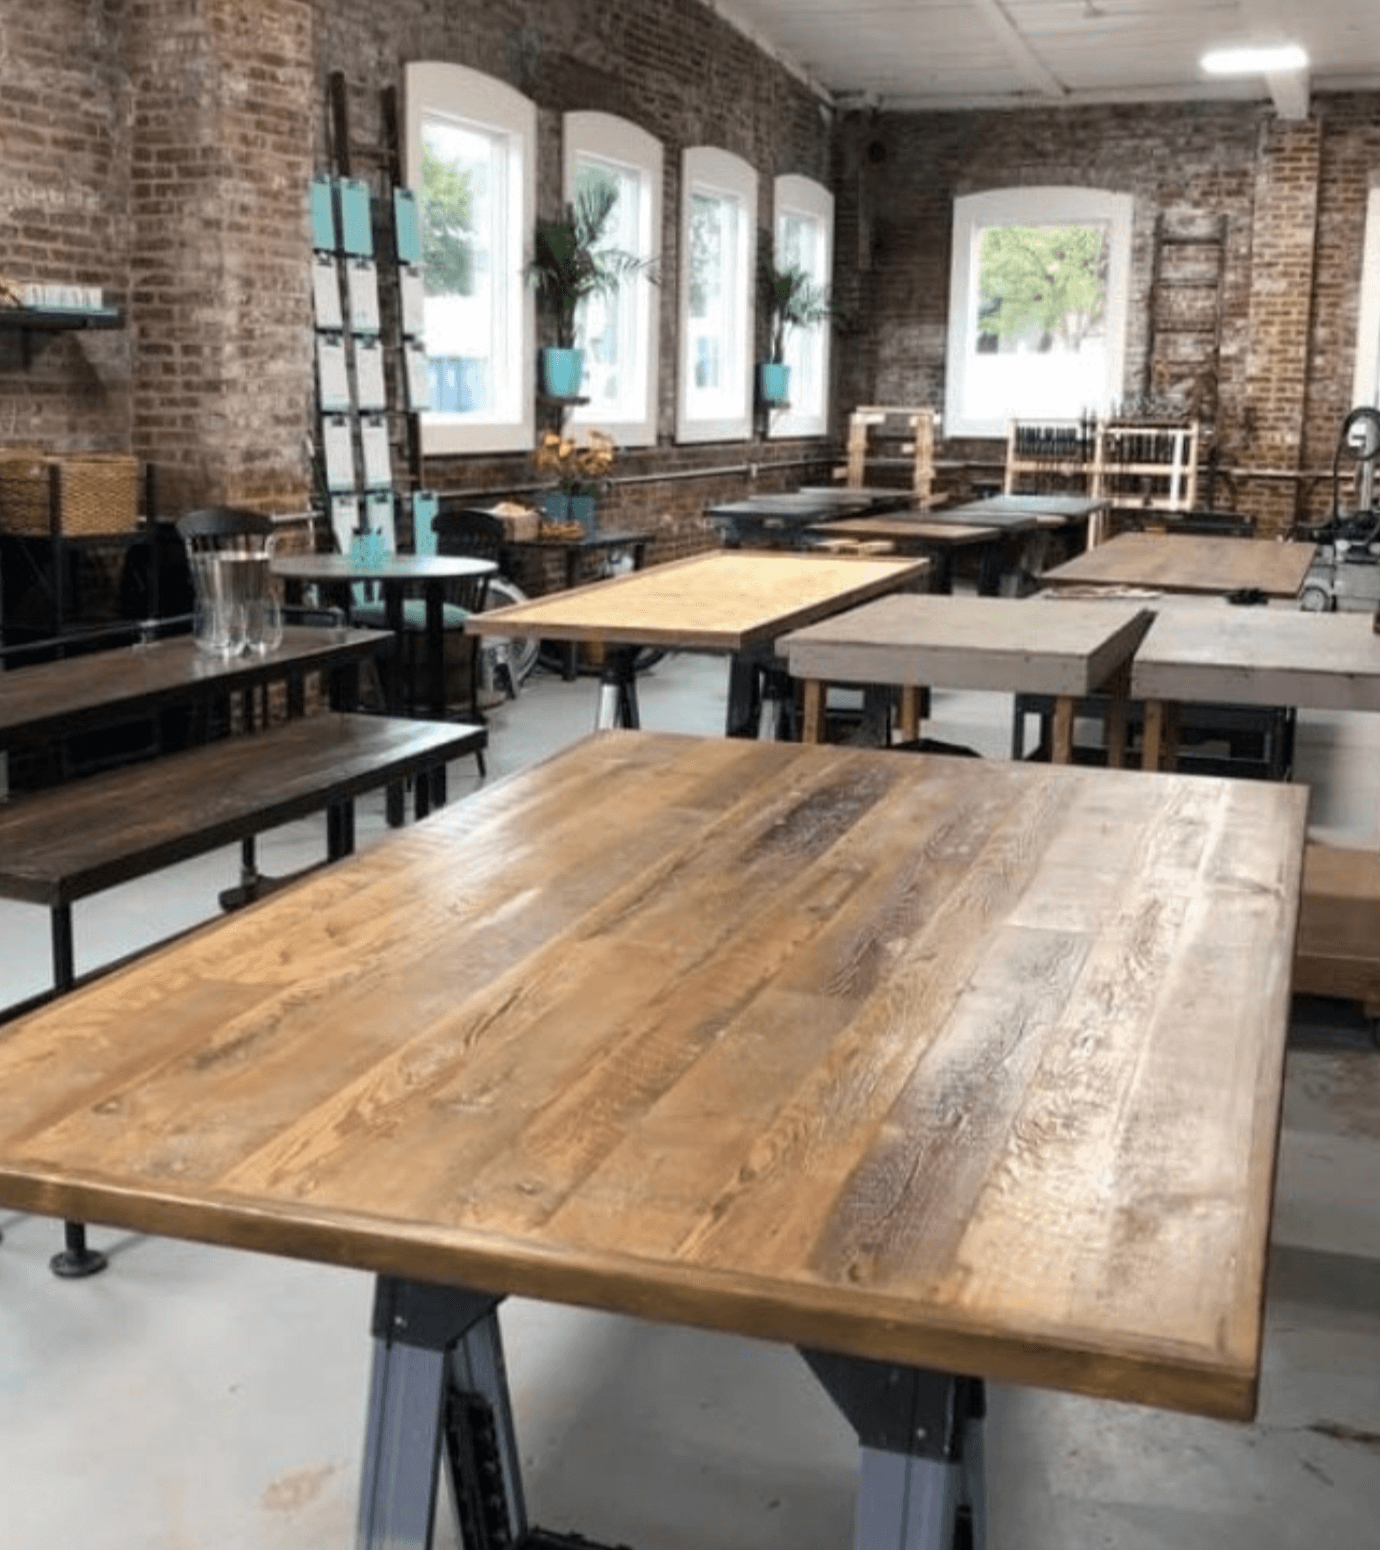 Multiple wooden tables in an exposed brick building with natural light coming through the large windows.